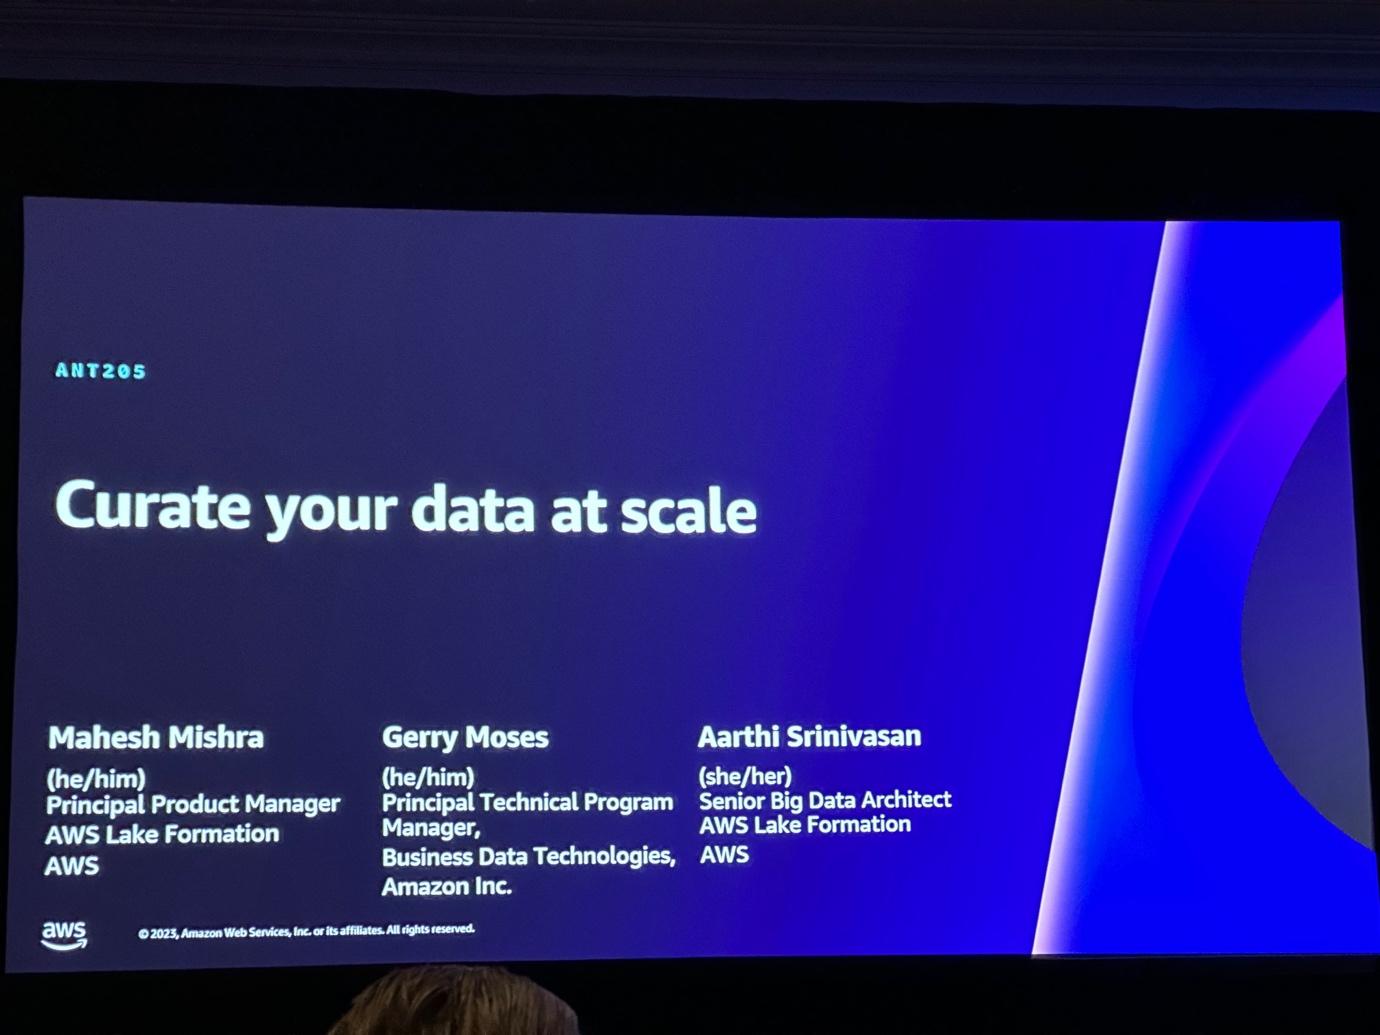 Curate your data at scale